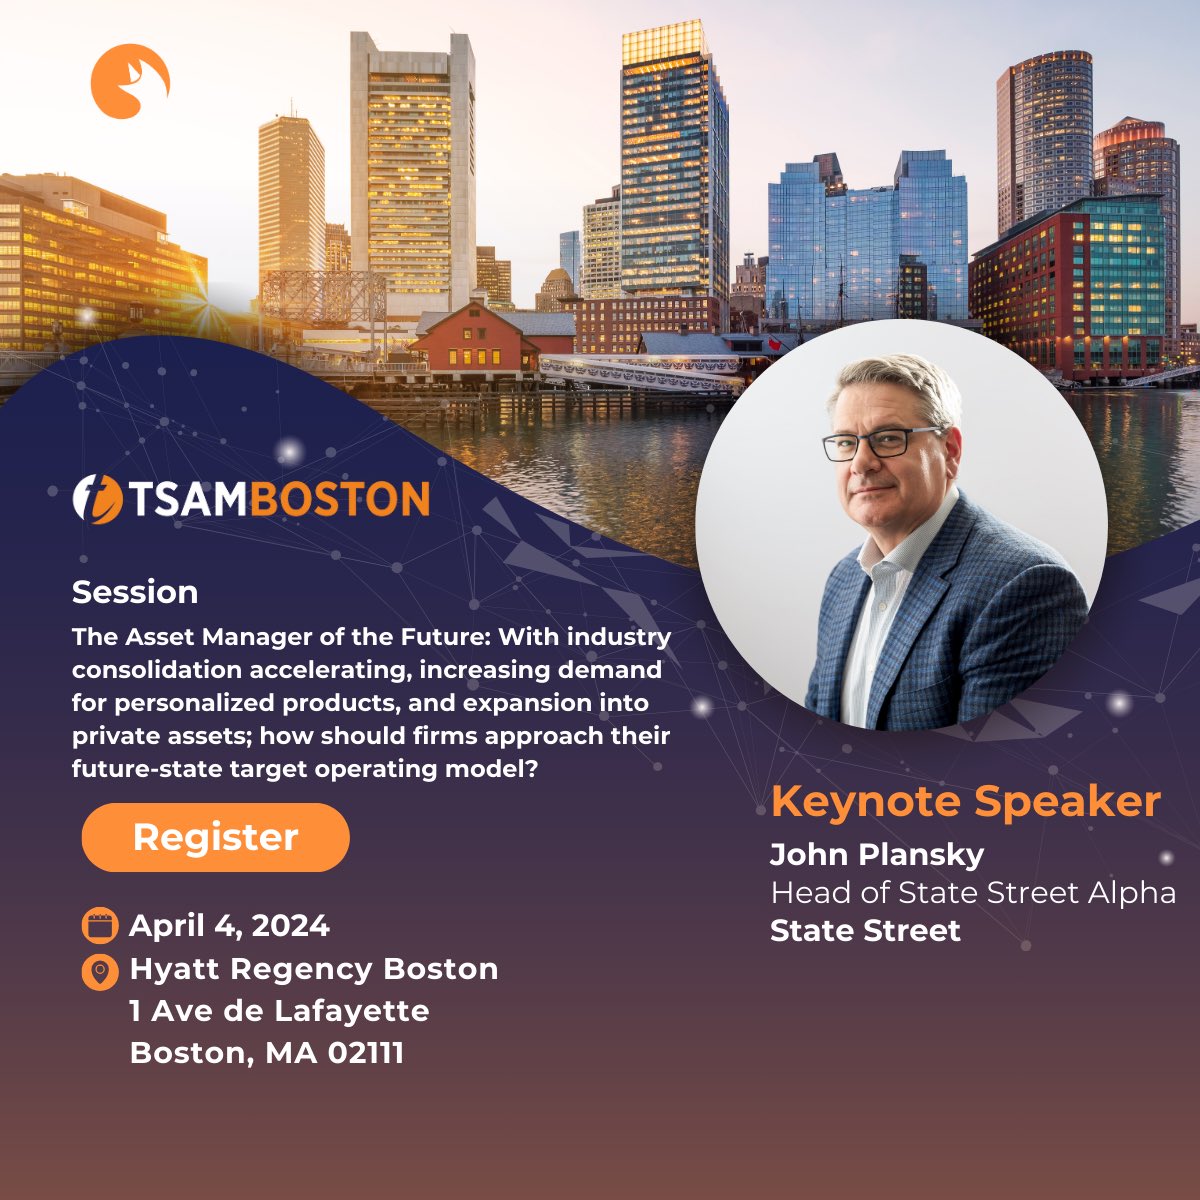 John Plansky, head of #StateStreetAlpha, will deliver the opening keynote at TSAM Boston: The Asset Manager of The Future. Hear how industry consolidation, increasing demand for personalized products, and expansion into private assets will affect future operating models. Learn…